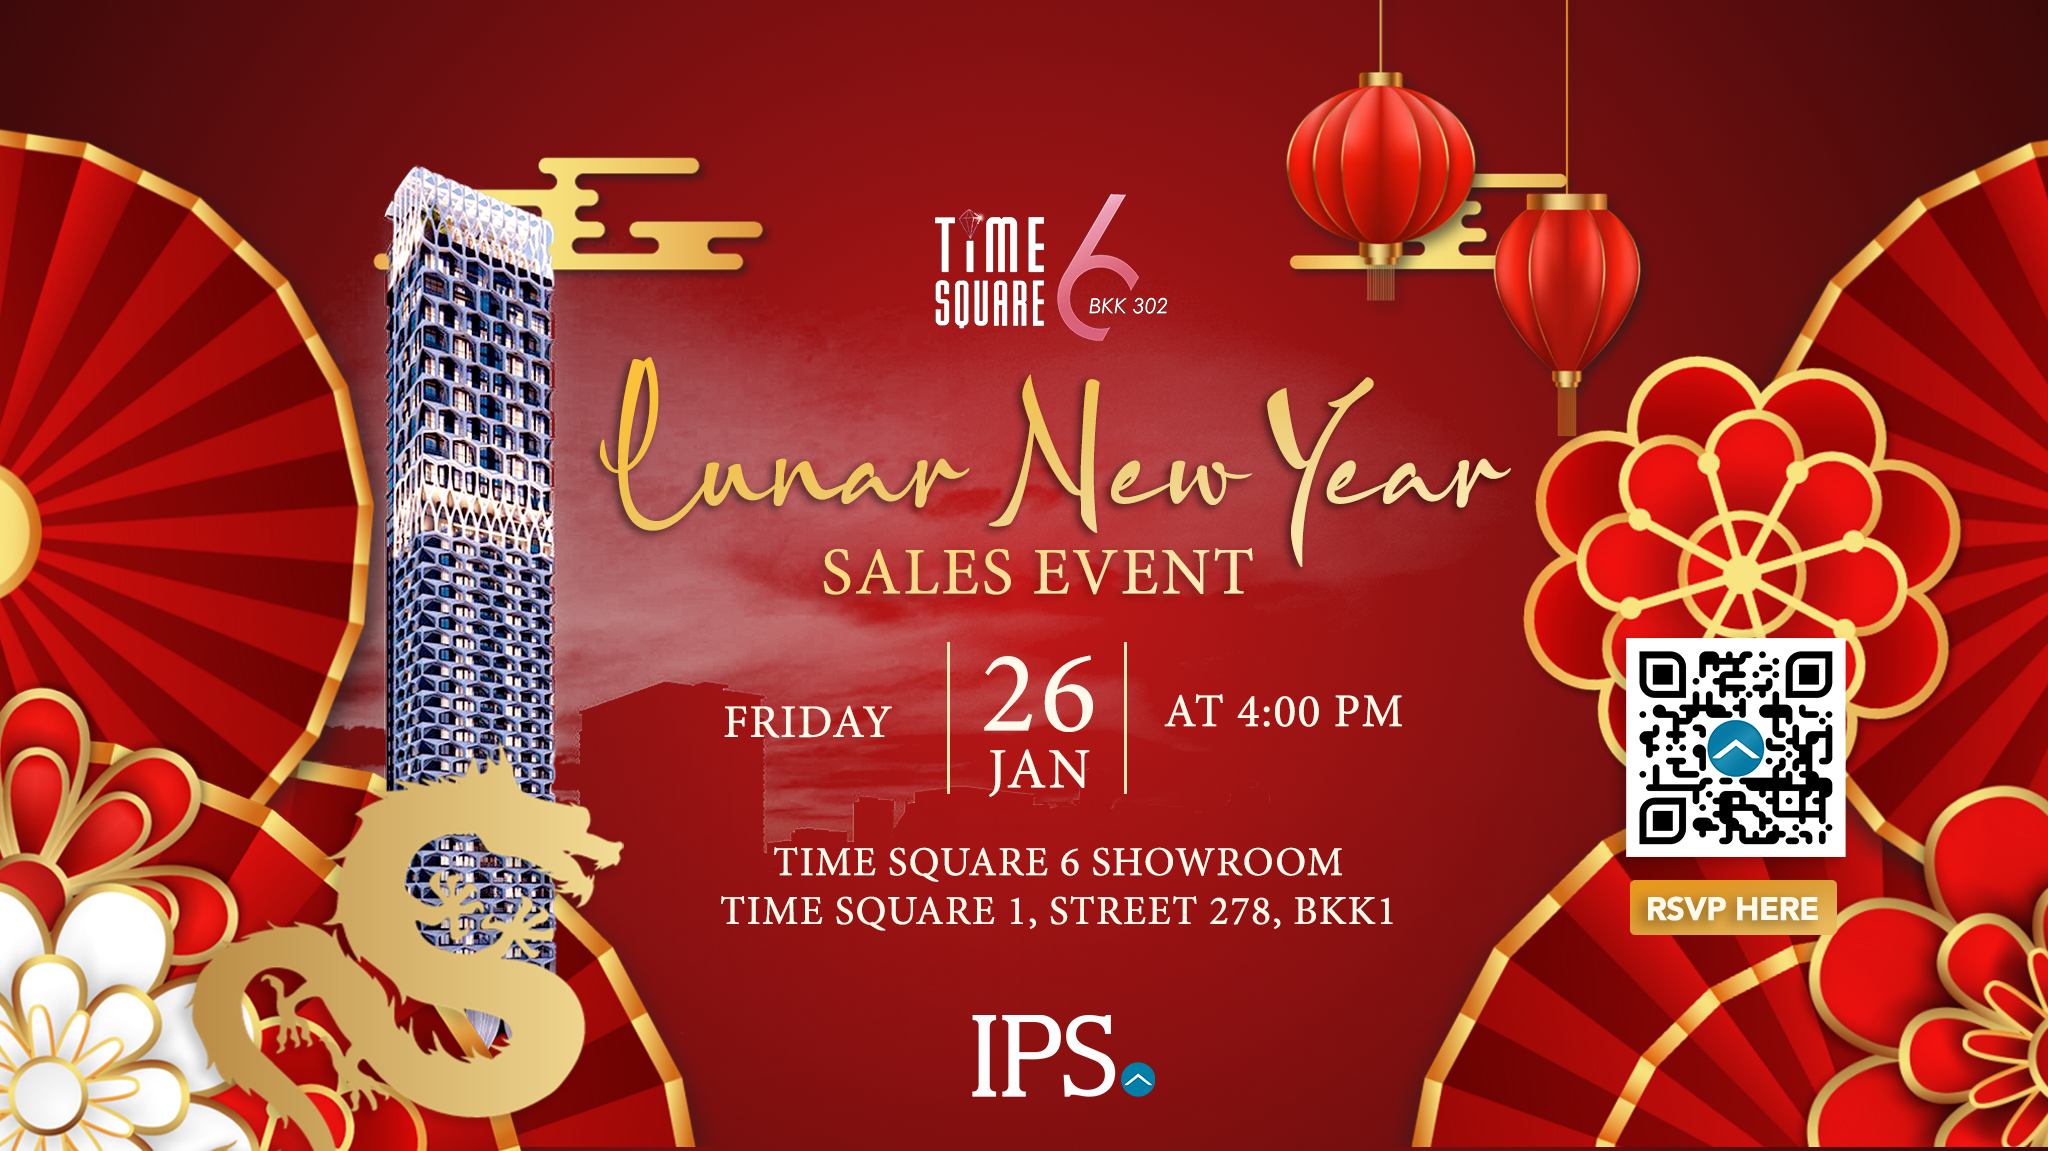 IPS and Time Square 6 Launch Lunar New Year Sales Event with Exclusive Offers & VIP Gala Evening on Friday 26th